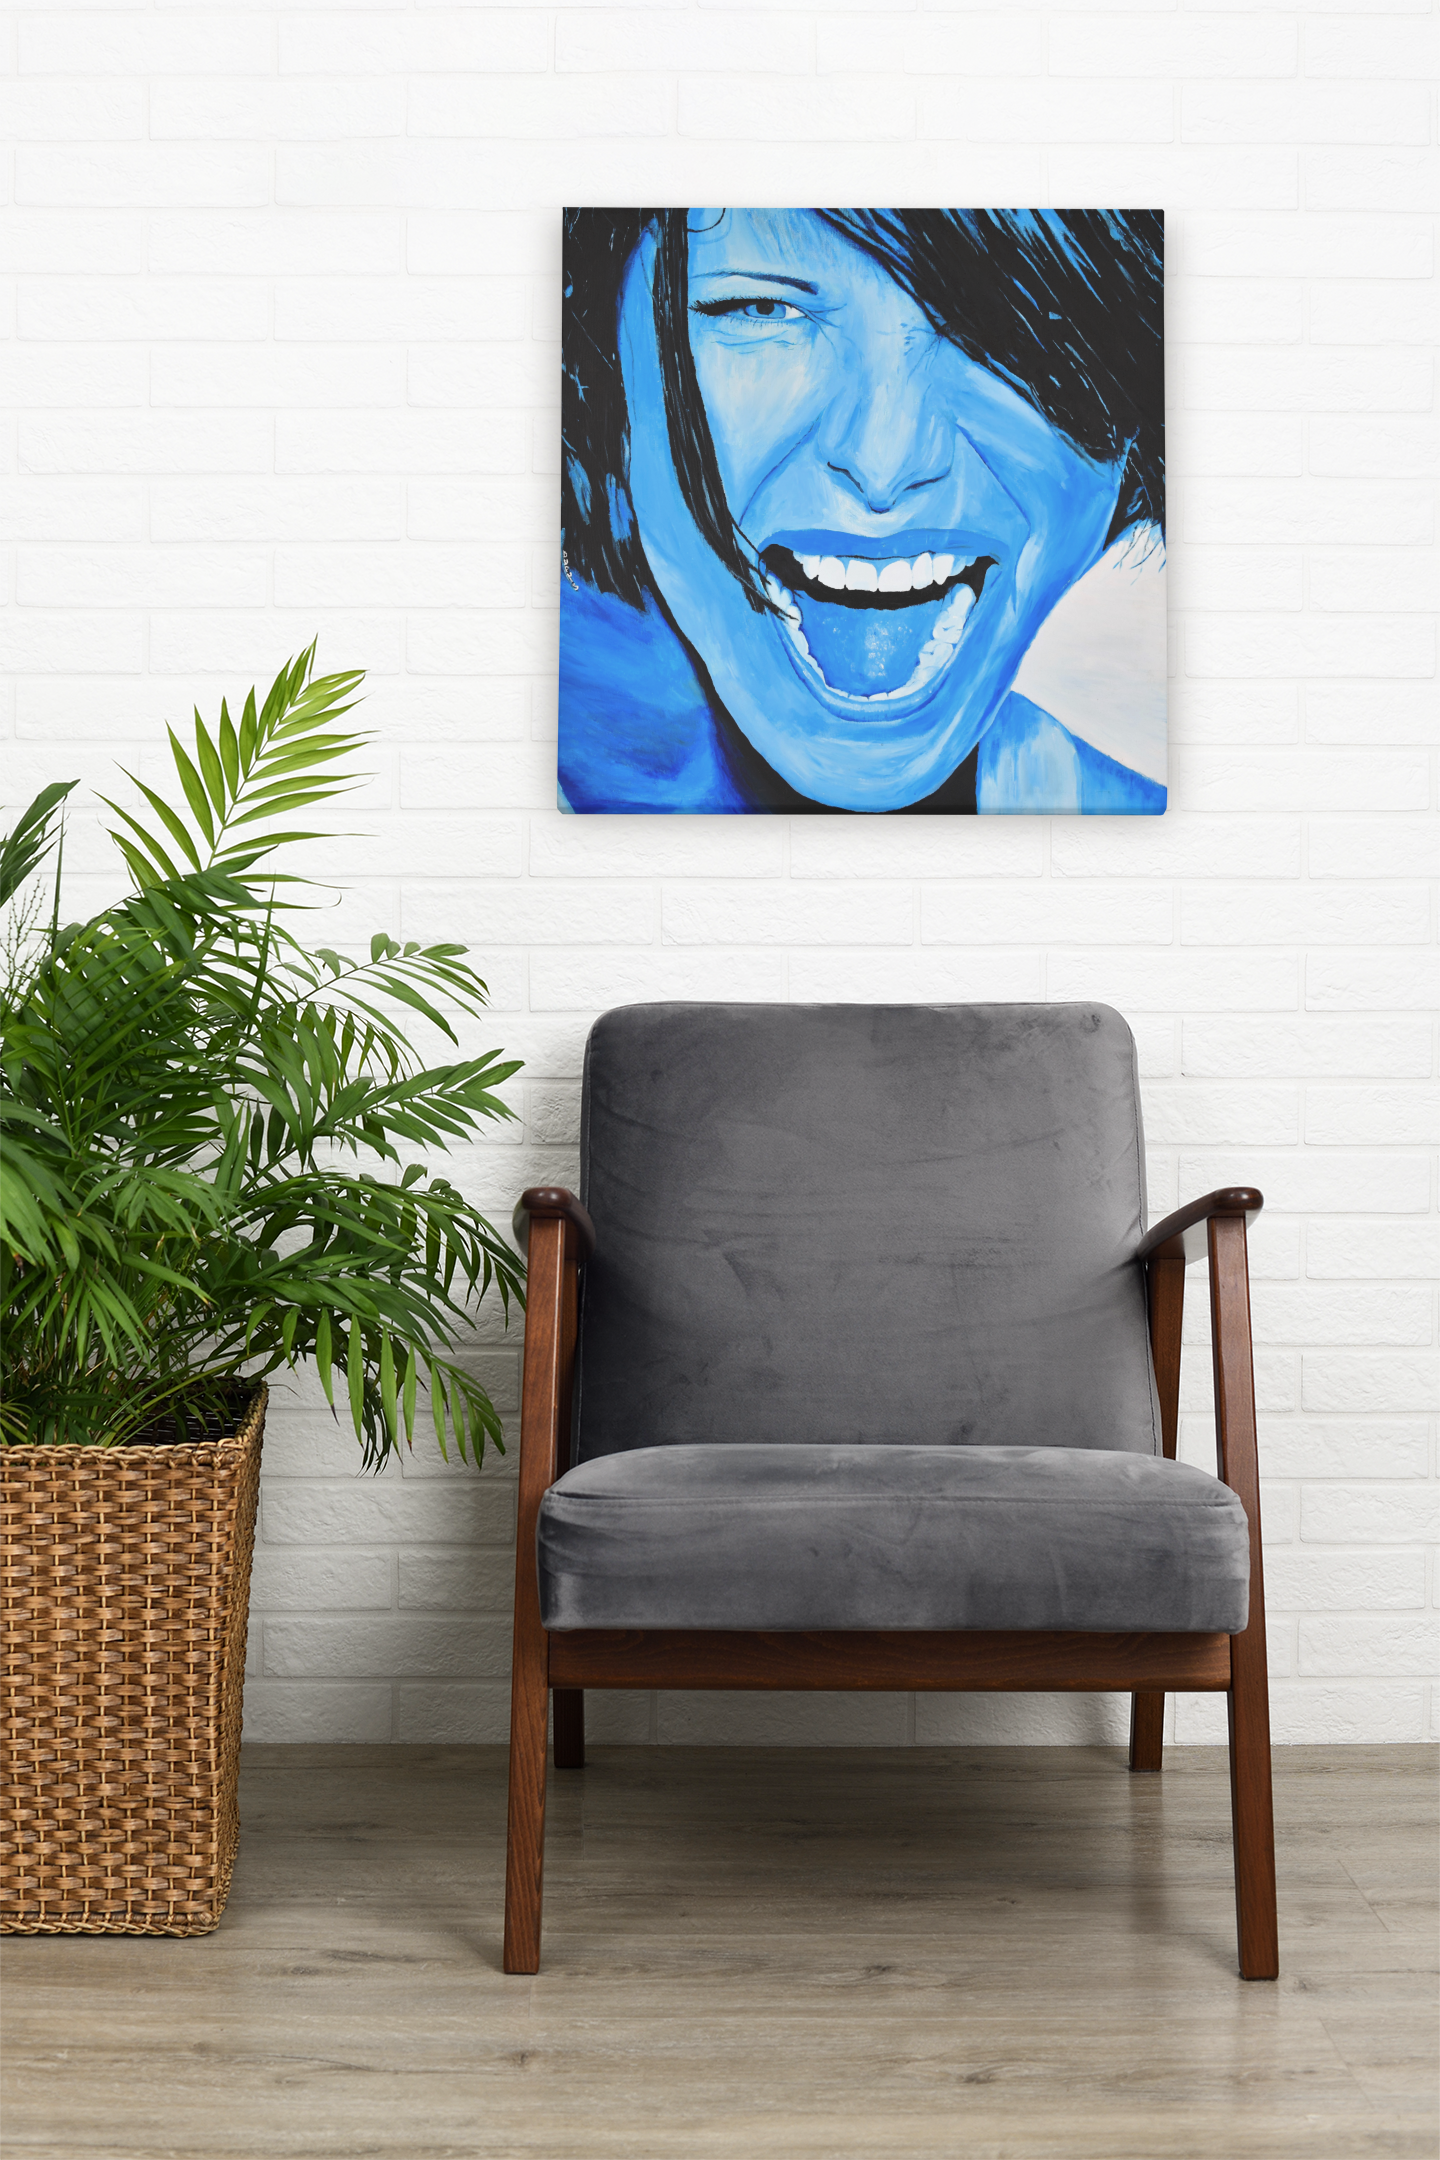 A bright blue giclee art print of a passionate woman showing emotions, woman portrait art, hanging on a wall over a living room chair next to a plant